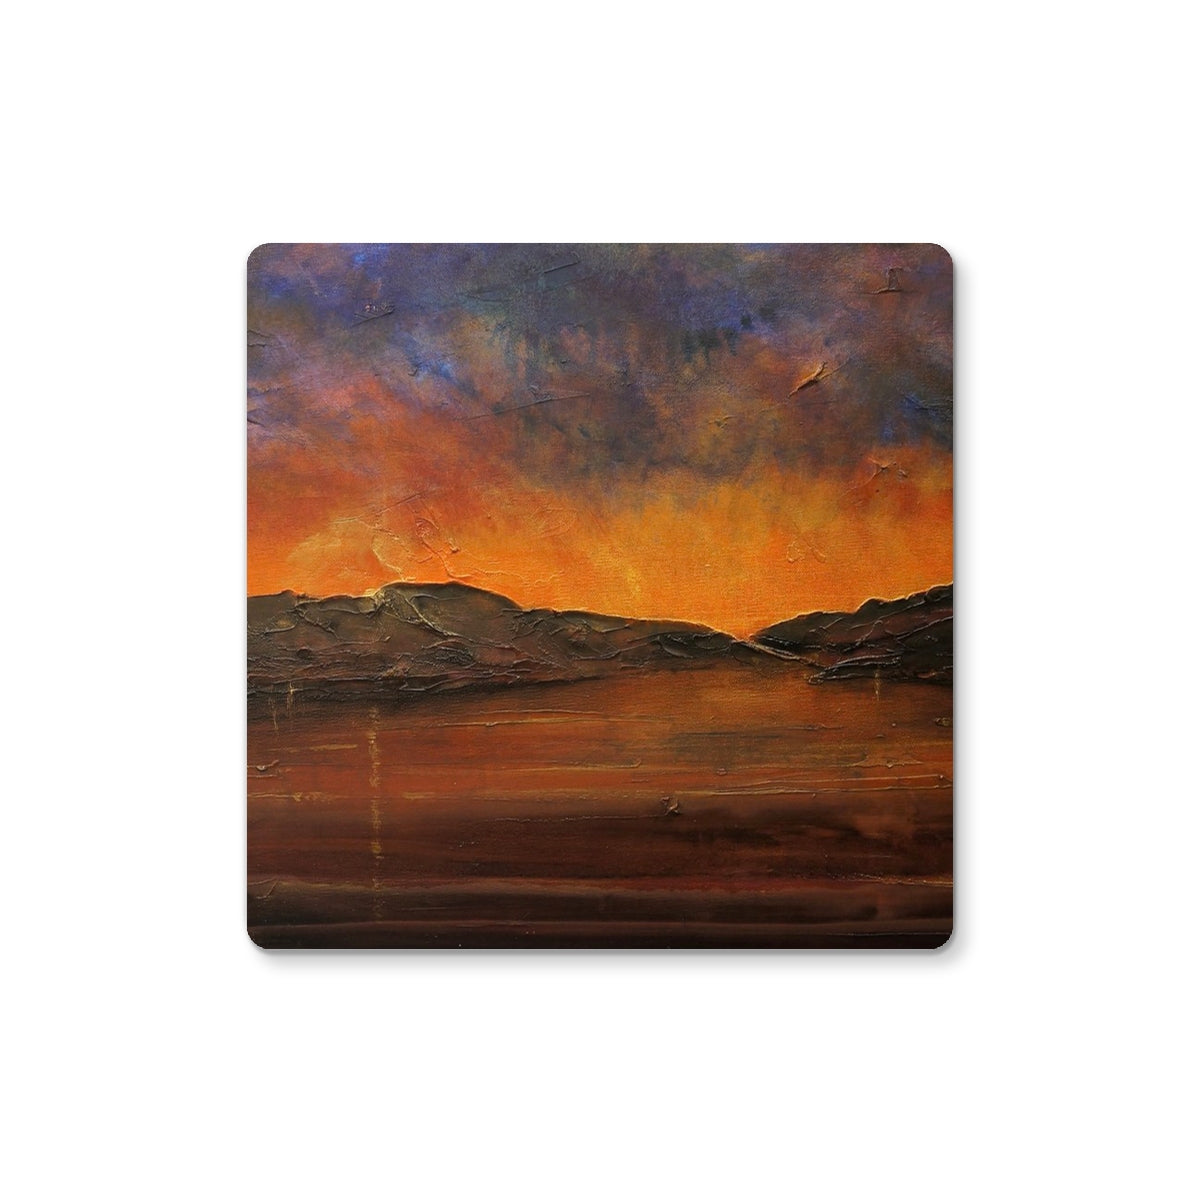 A Brooding Clyde Dusk Art Gifts Coaster-Coasters-River Clyde Art Gallery-Single Coaster-Paintings, Prints, Homeware, Art Gifts From Scotland By Scottish Artist Kevin Hunter